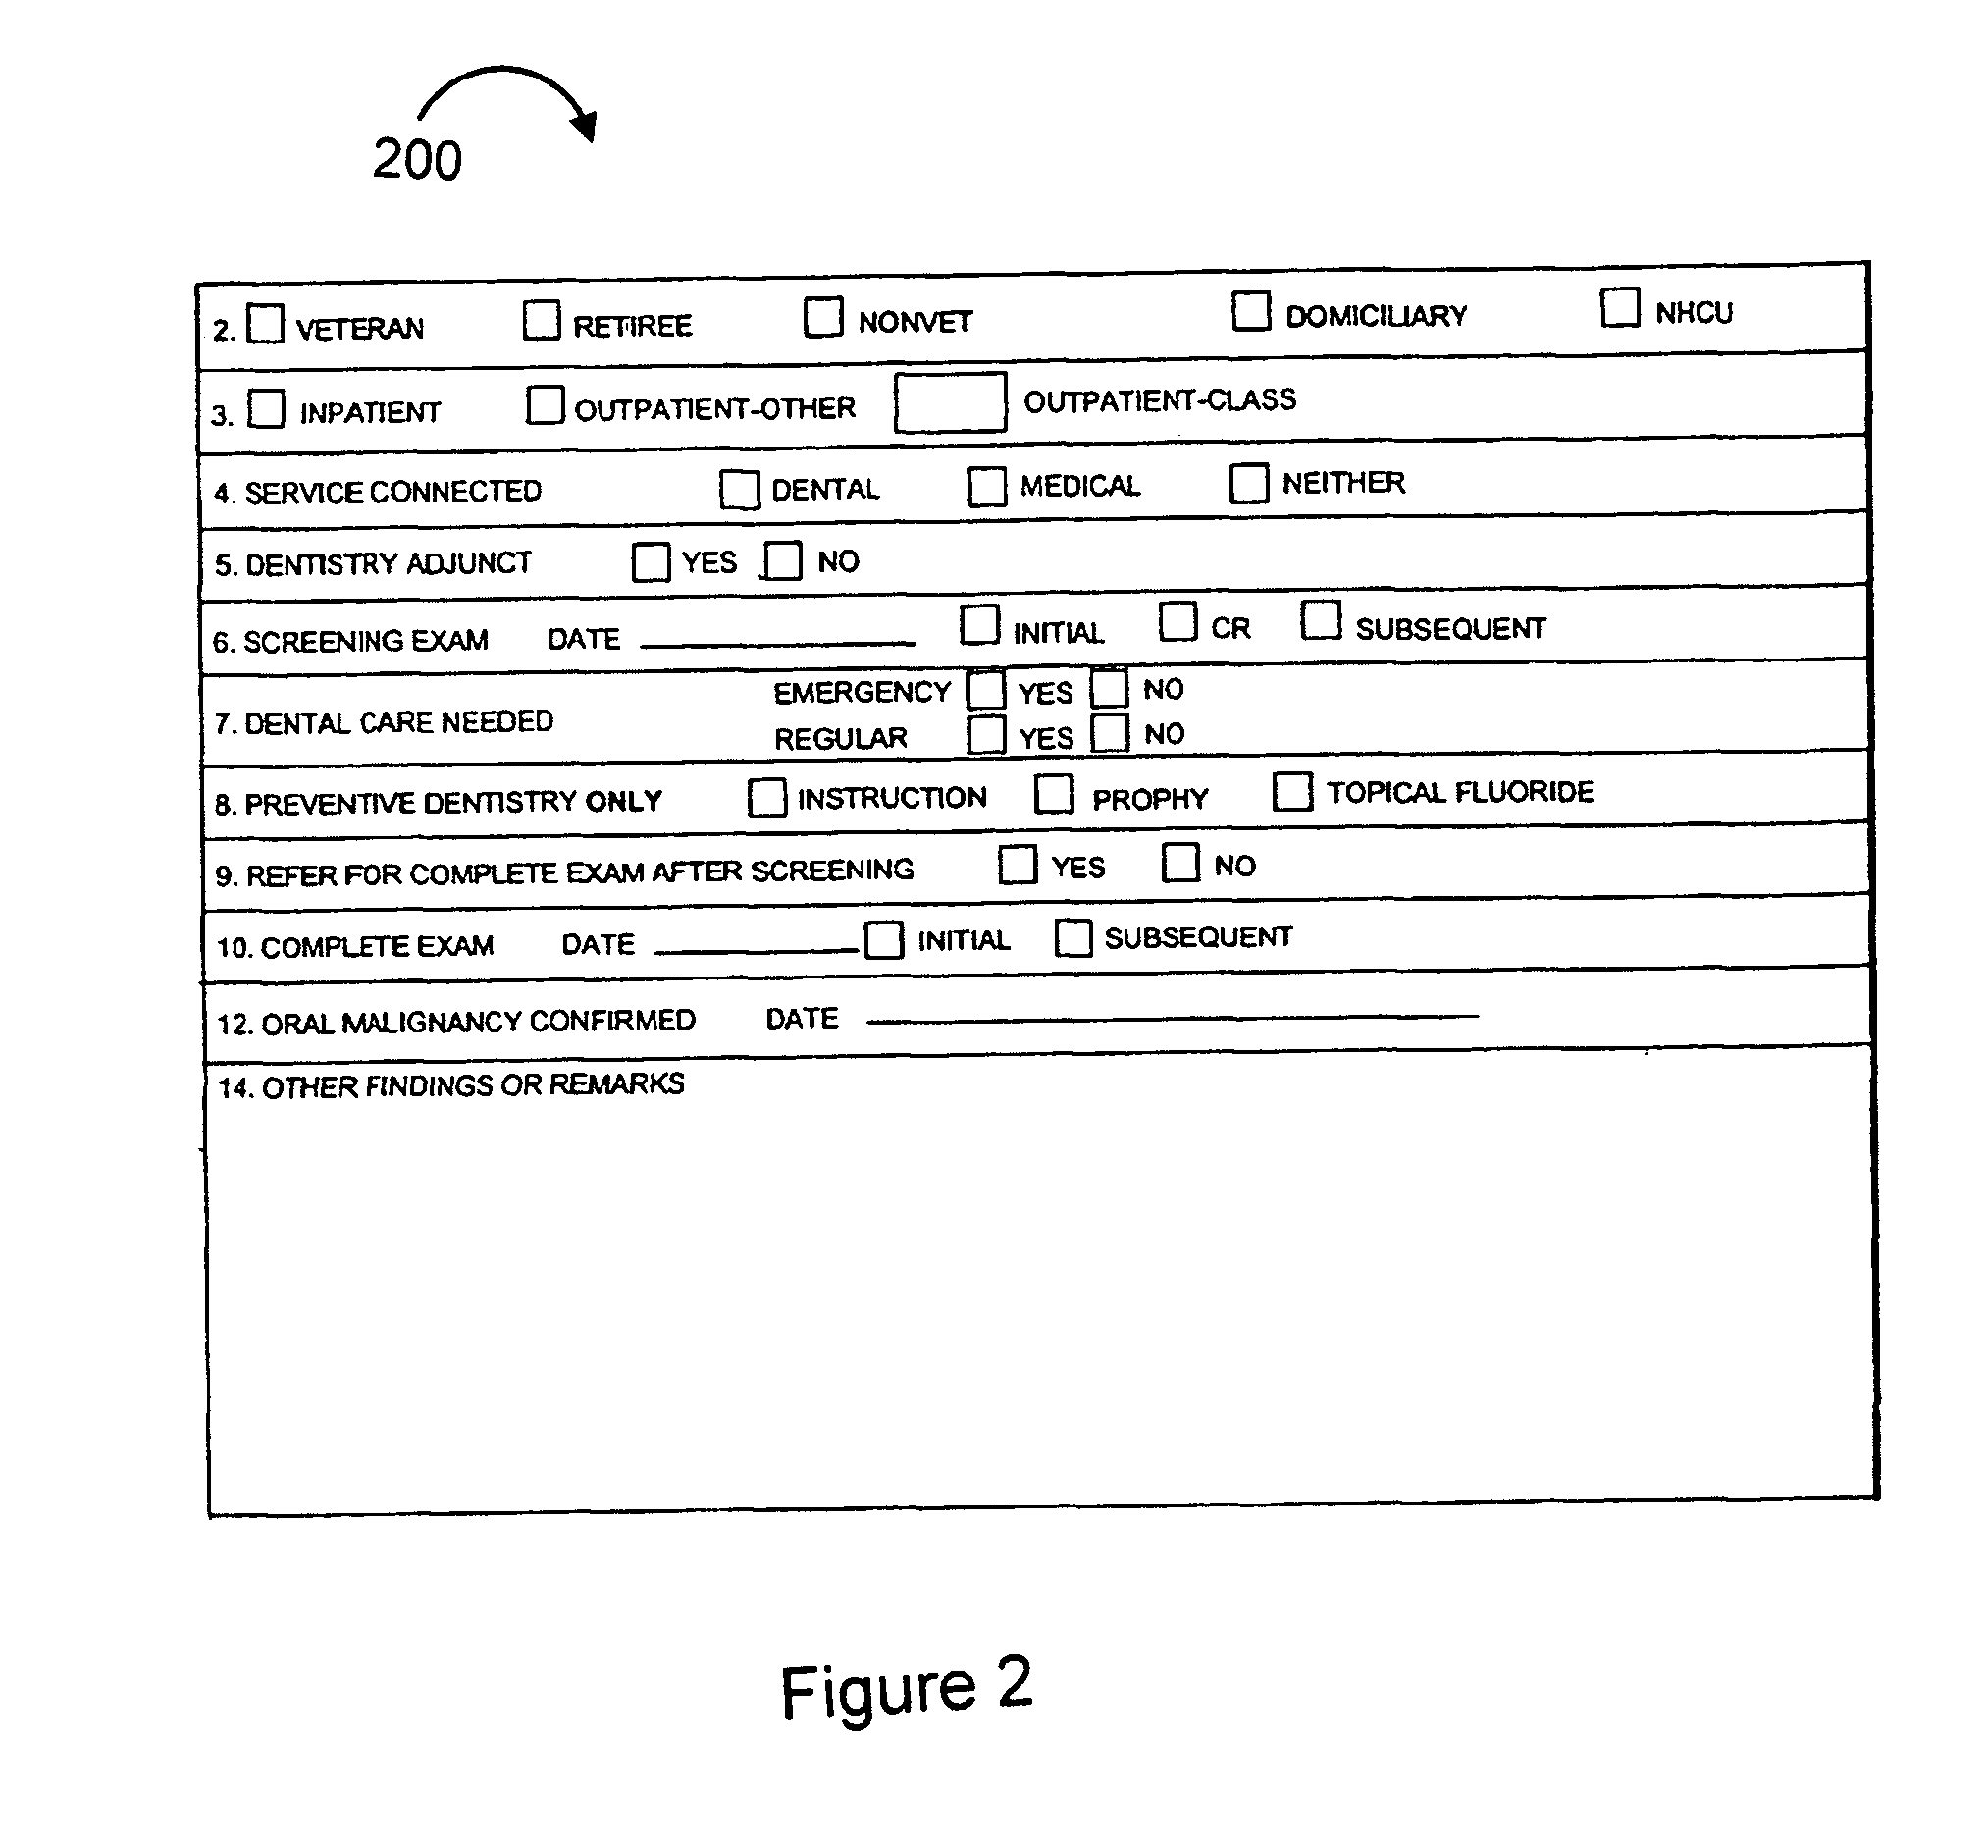 Method and apparatus for recognizing a digitized form, extracting information from a filled-in form, and generating a corrected filled-in form